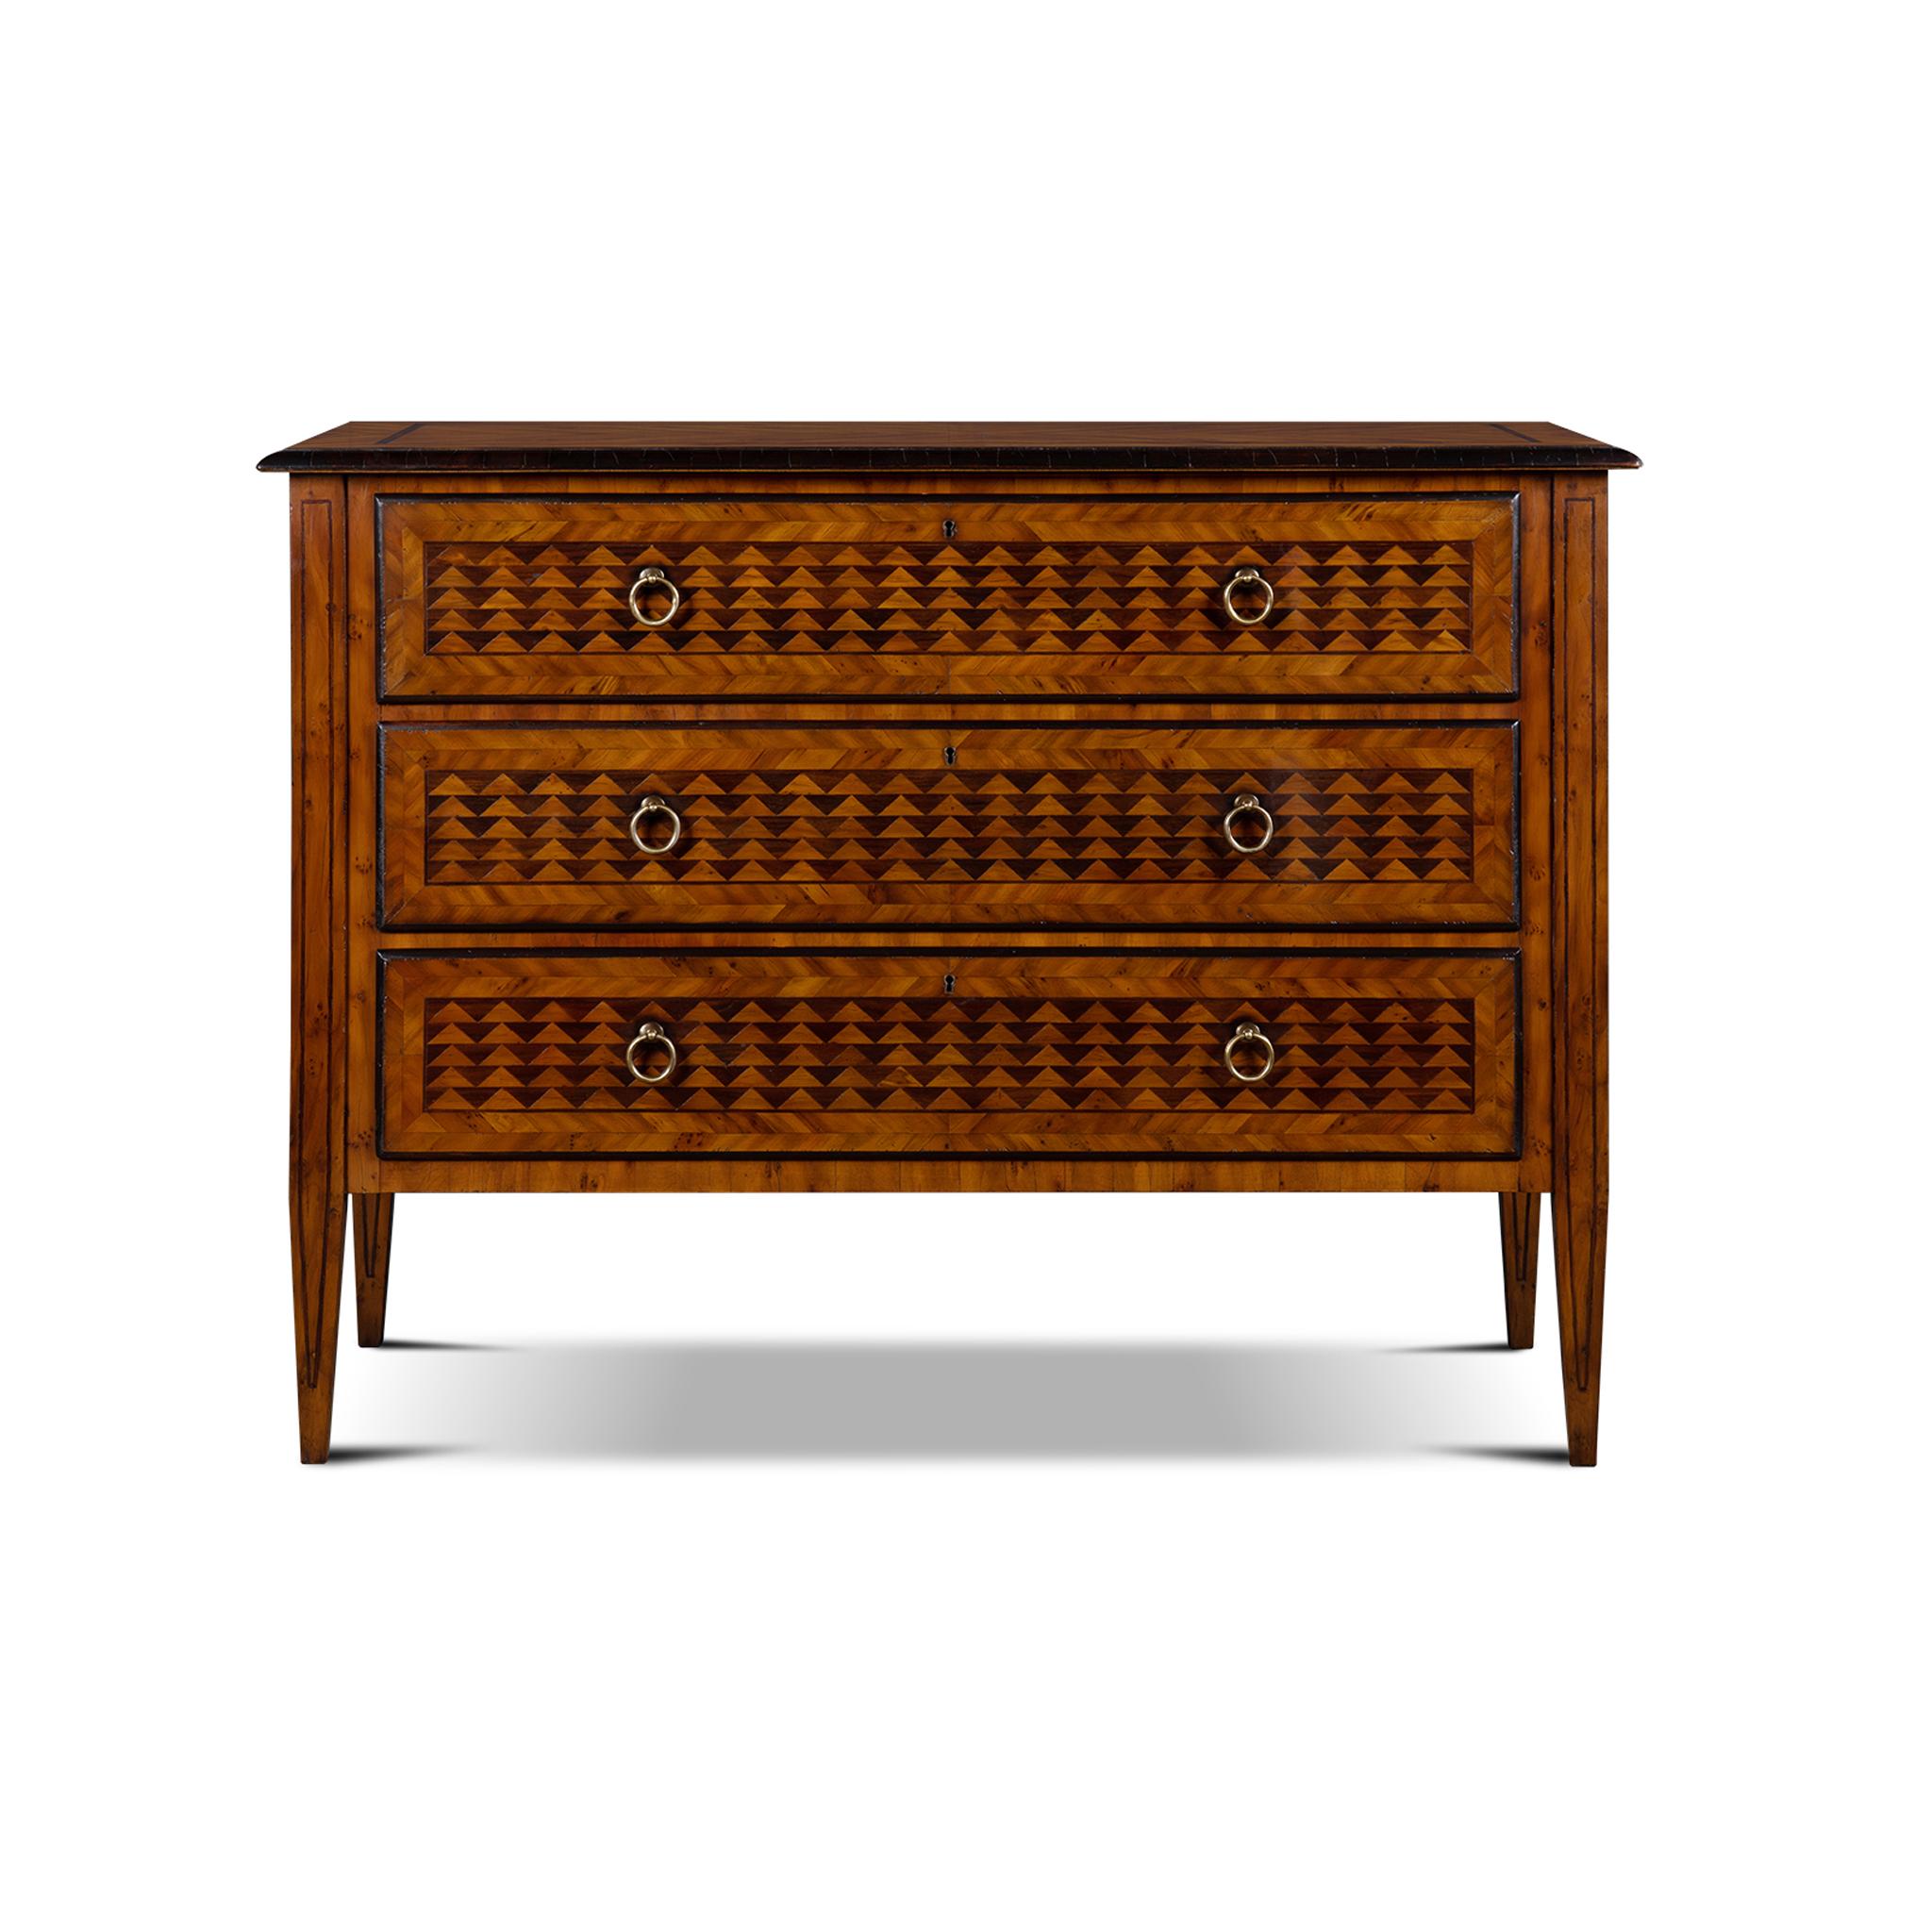 The Laon Chest is inspired in the Neoclassical Italian style. This is the perfect piece to accompany a classically styled environment and stand out amongst modern settings as a statement piece. With intricate marquetry made of dark and light